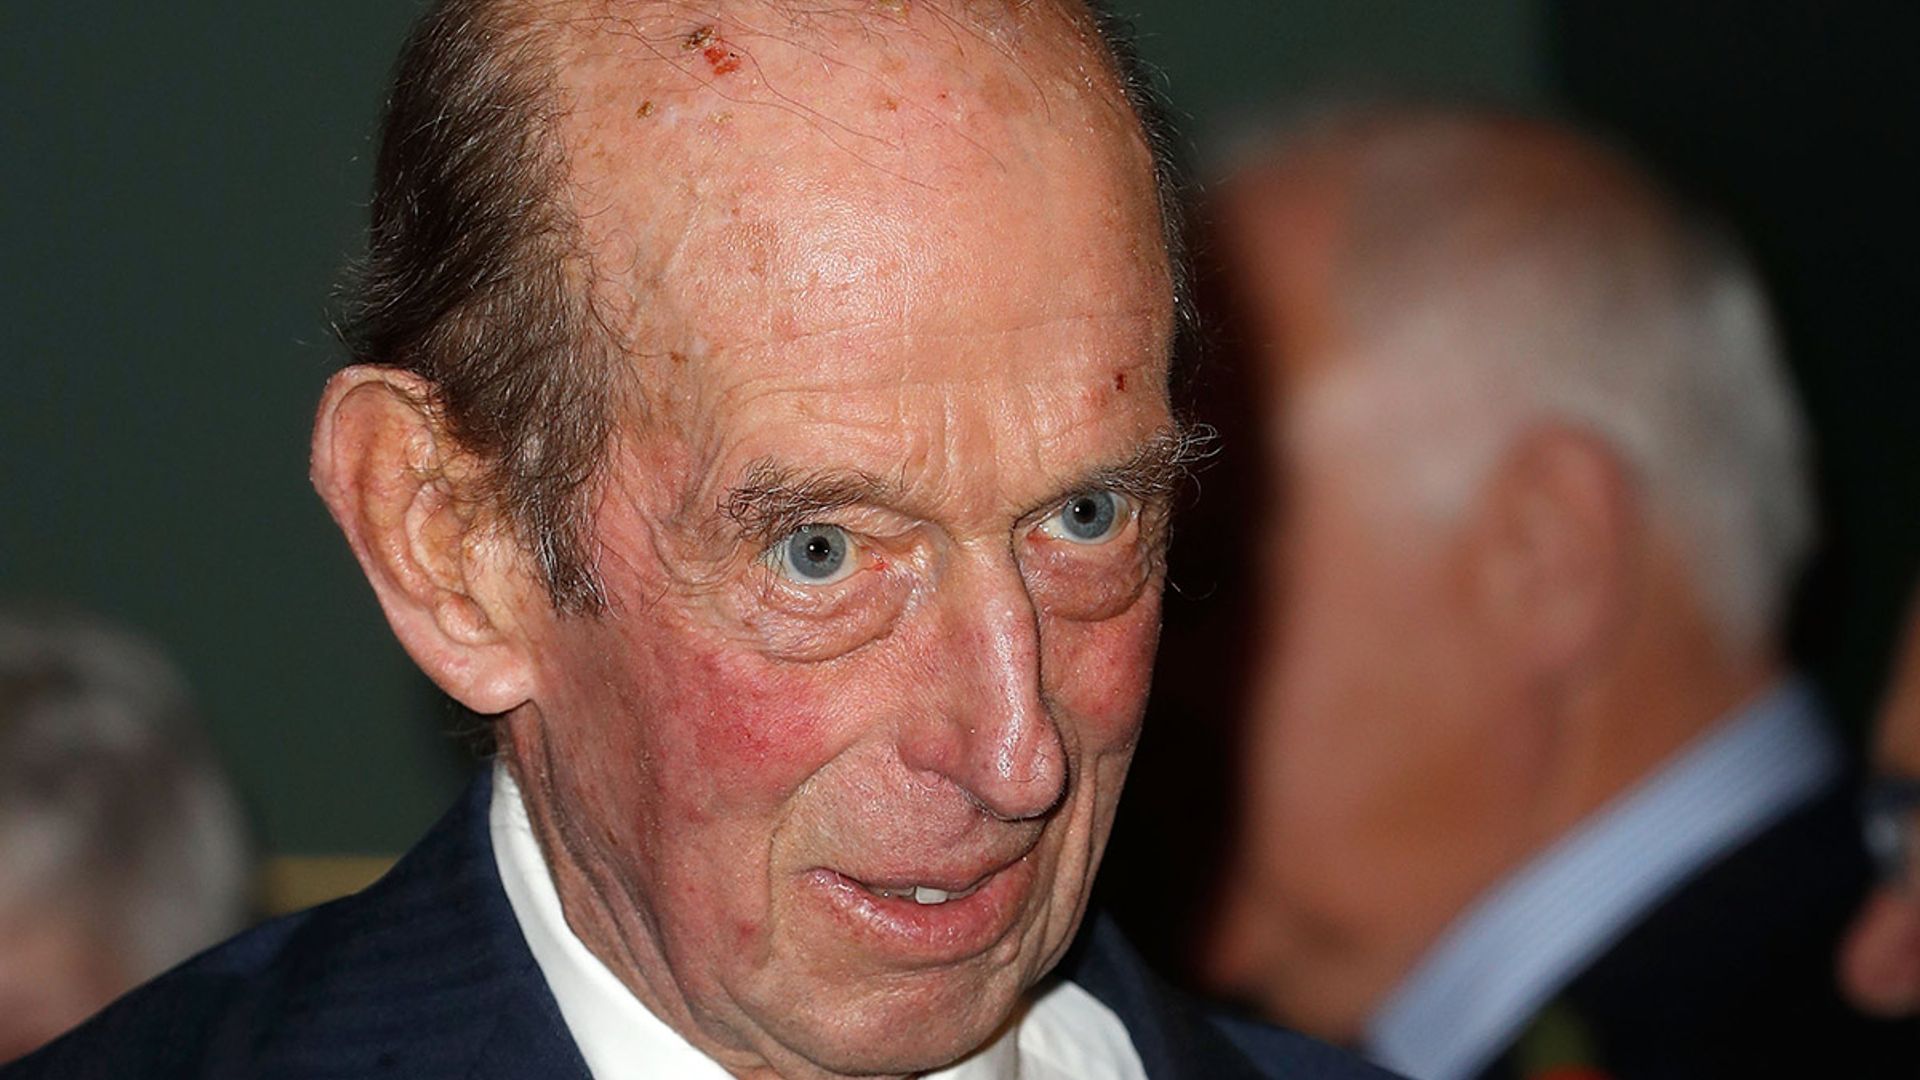 The Queen's cousin Duke of Kent 'involved in car crash' with student near Brighton